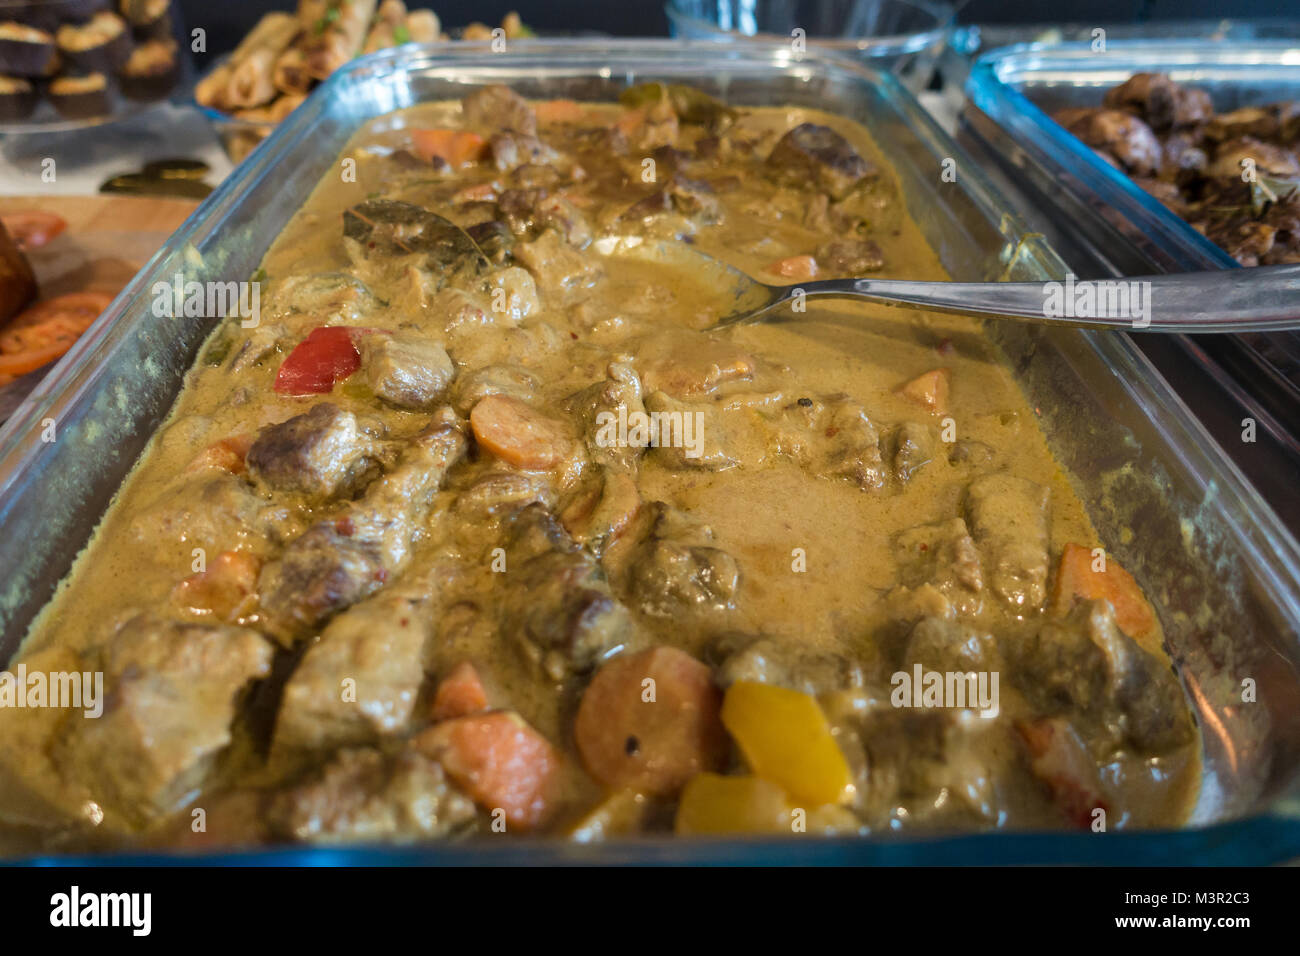 A large dish of beef rendang, an Asiann dish form Malaysia and The Philippines. Stock Photo